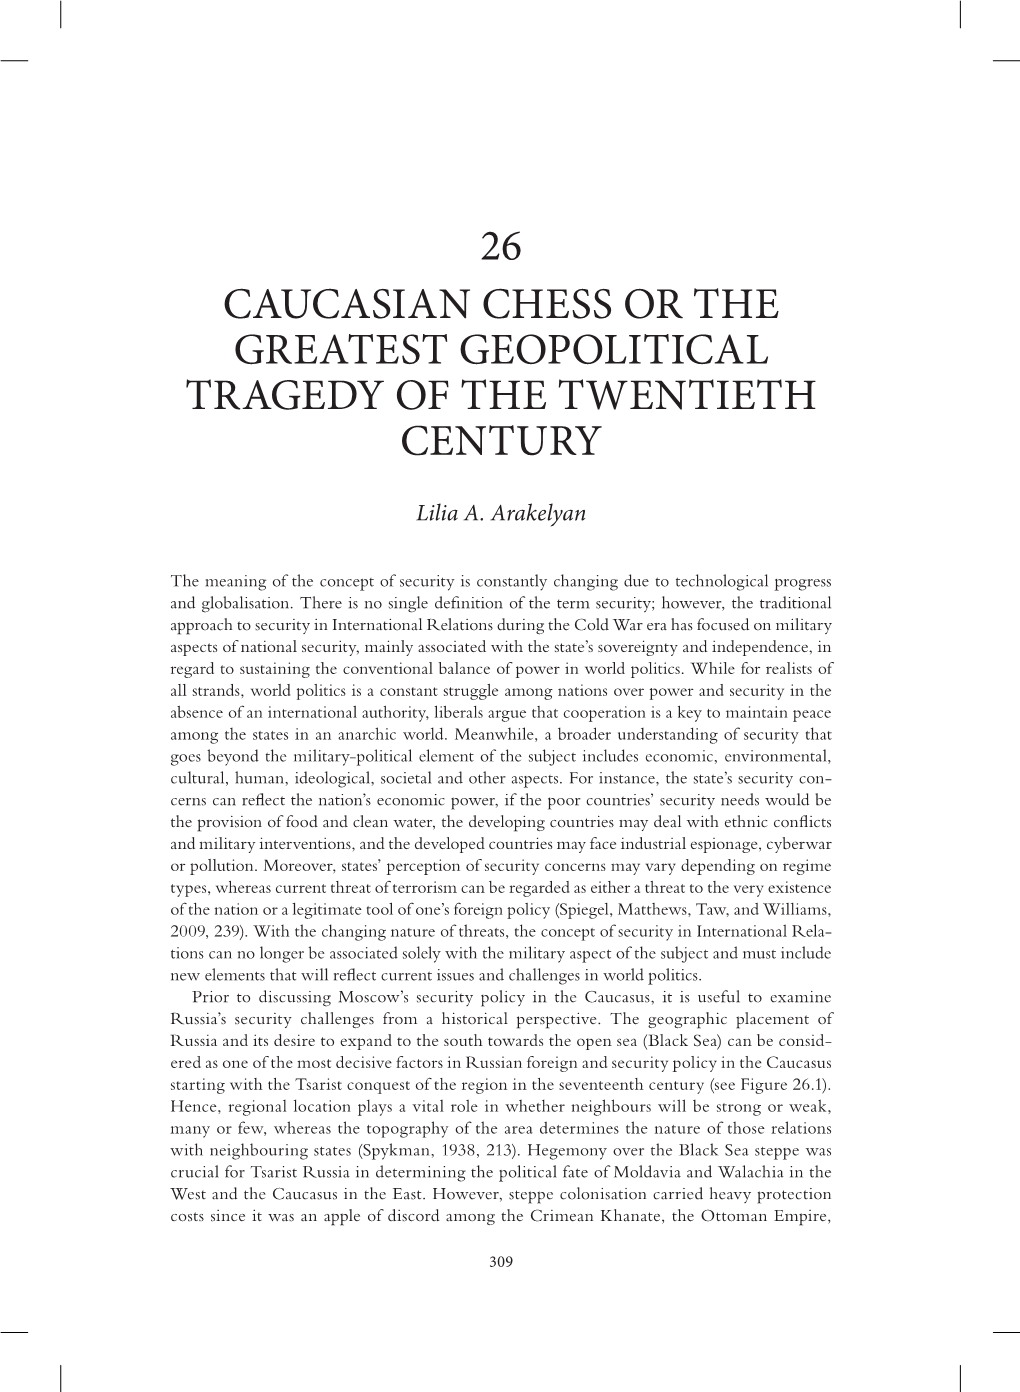 Caucasian Chess Or the Greatest Geopolitical Tragedy of the Twentieth Century